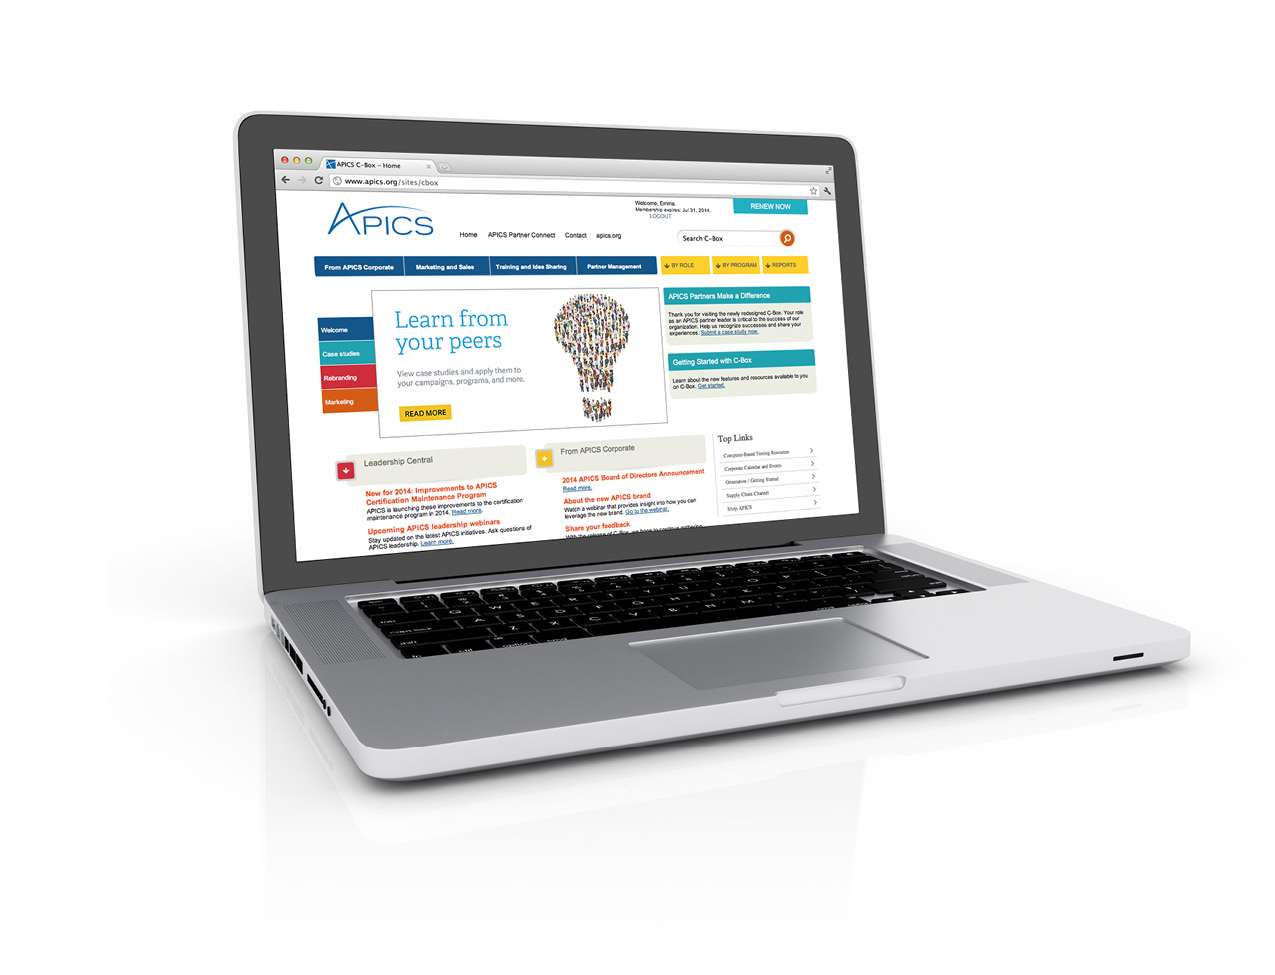  The redesigned C-Box website serves as a resource portal for APICS global chapters. 